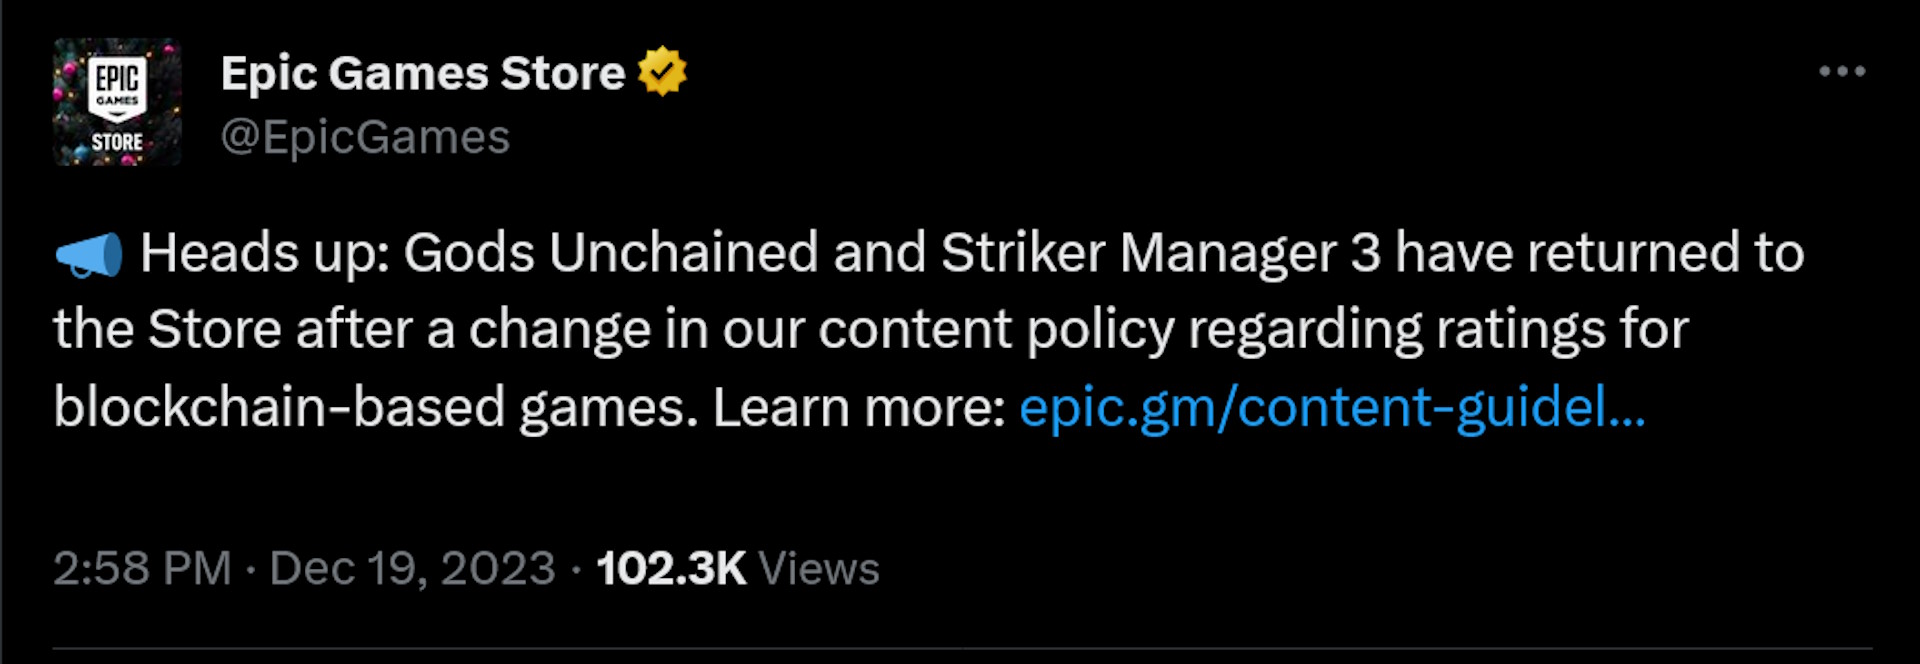 Heads up: Gods Unchained and Striker Manager 3 have returned to the Store after a change in our content policy regarding ratings for blockchain-based games. Learn more: https://epic.gm/content-guidelines